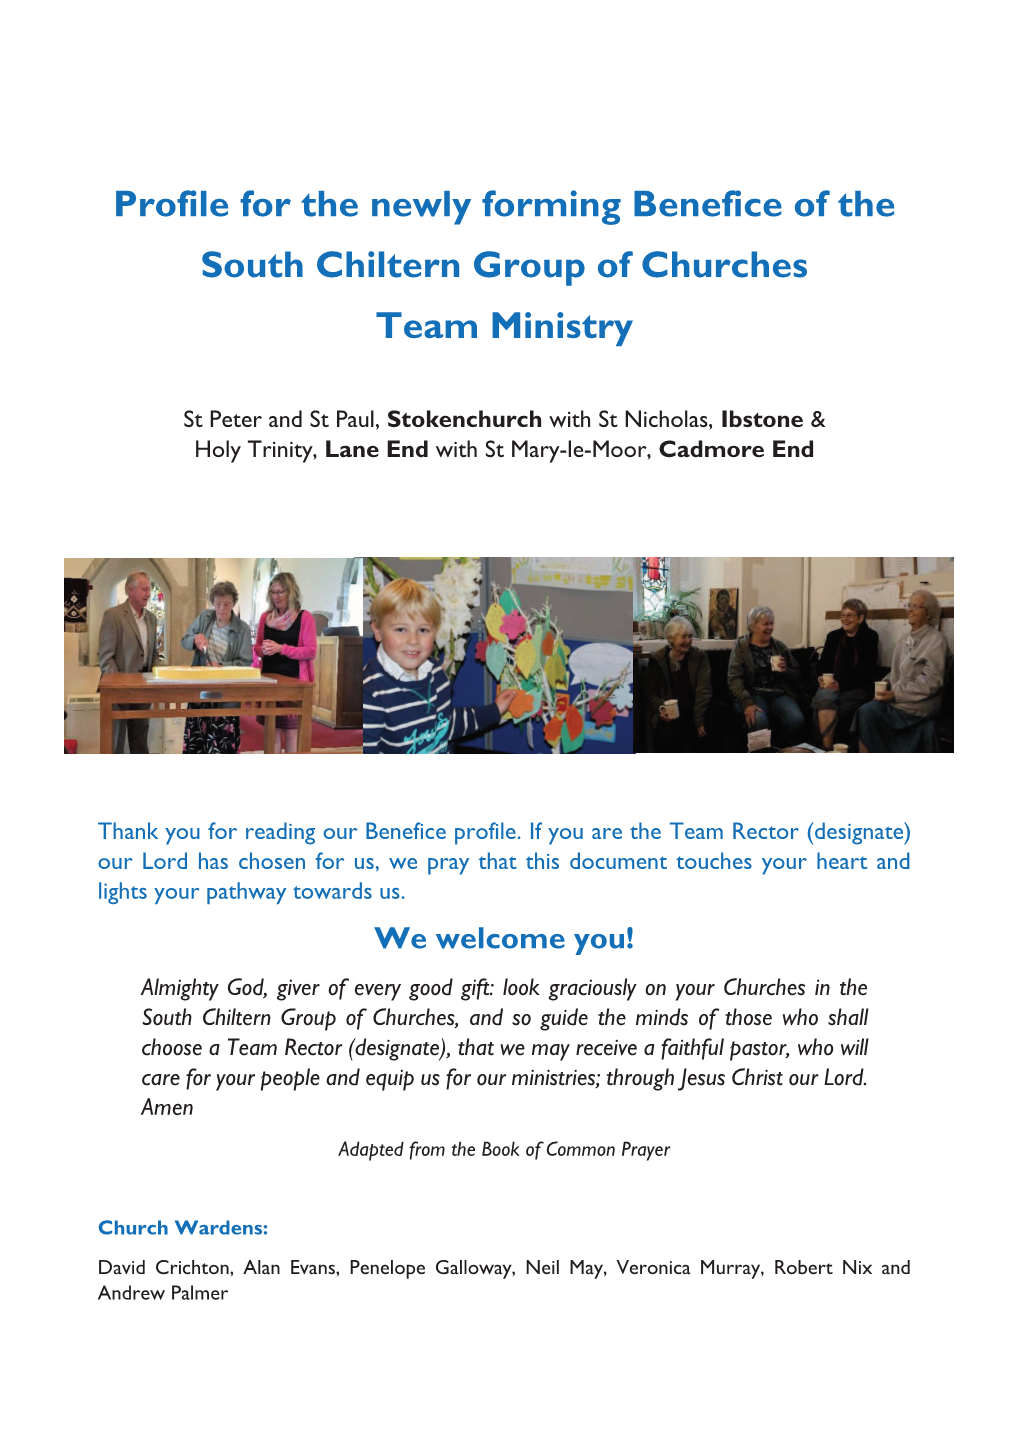 Profile for the Newly Forming Benefice of the South Chiltern Group of Churches Team Ministry